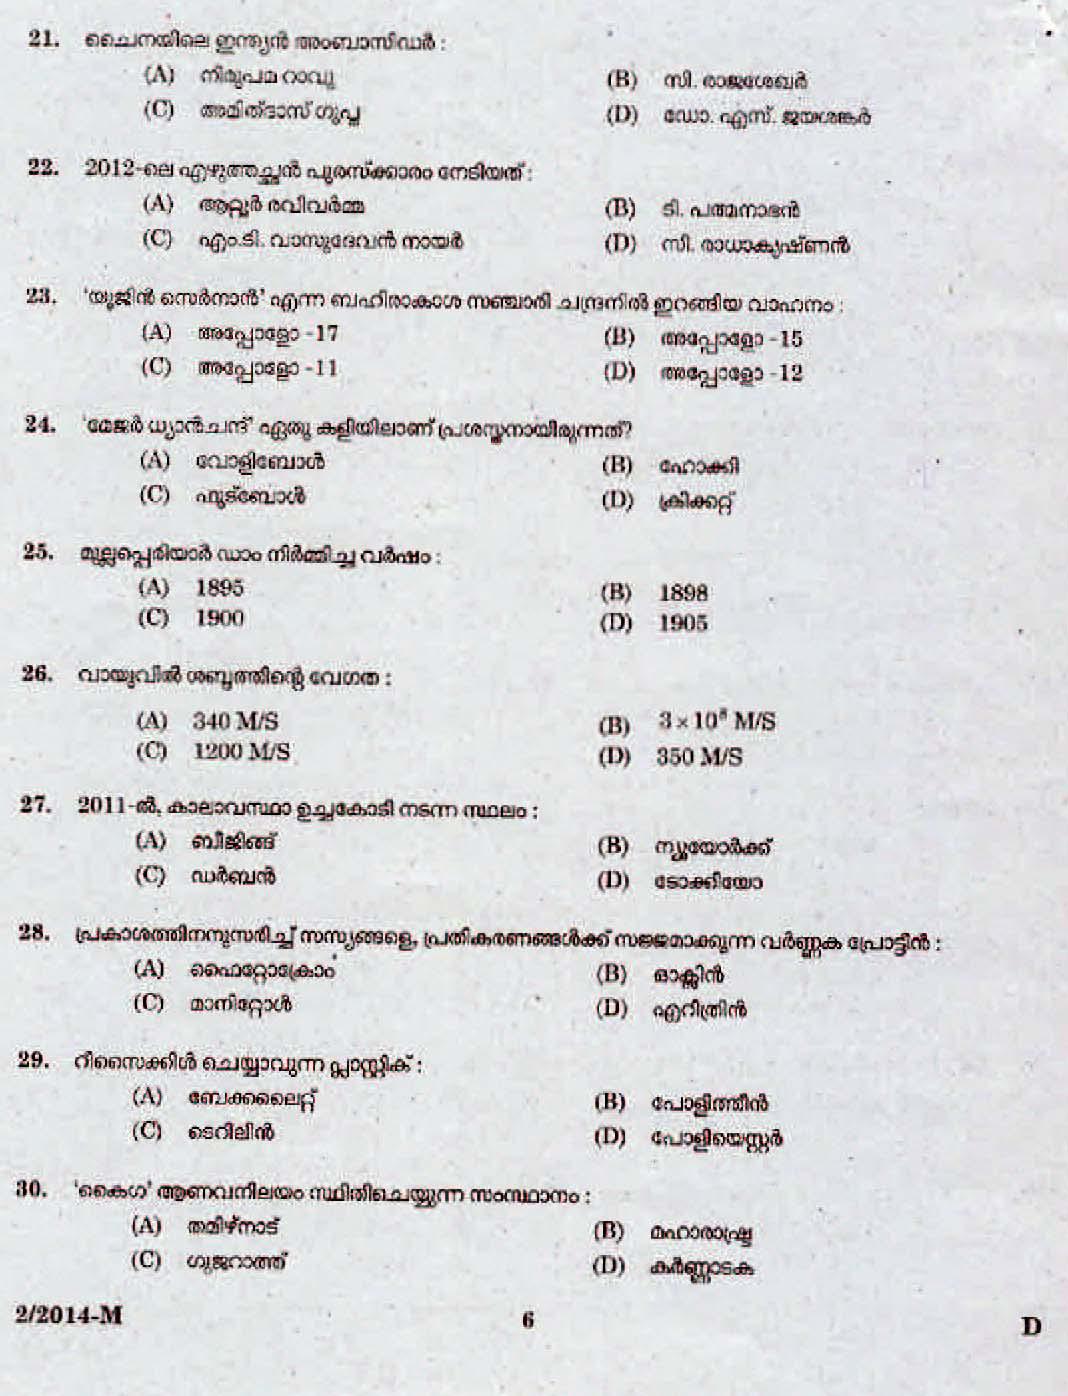 LD Clerk Question Paper Malayalam 2014 Paper Code 022014 M 3